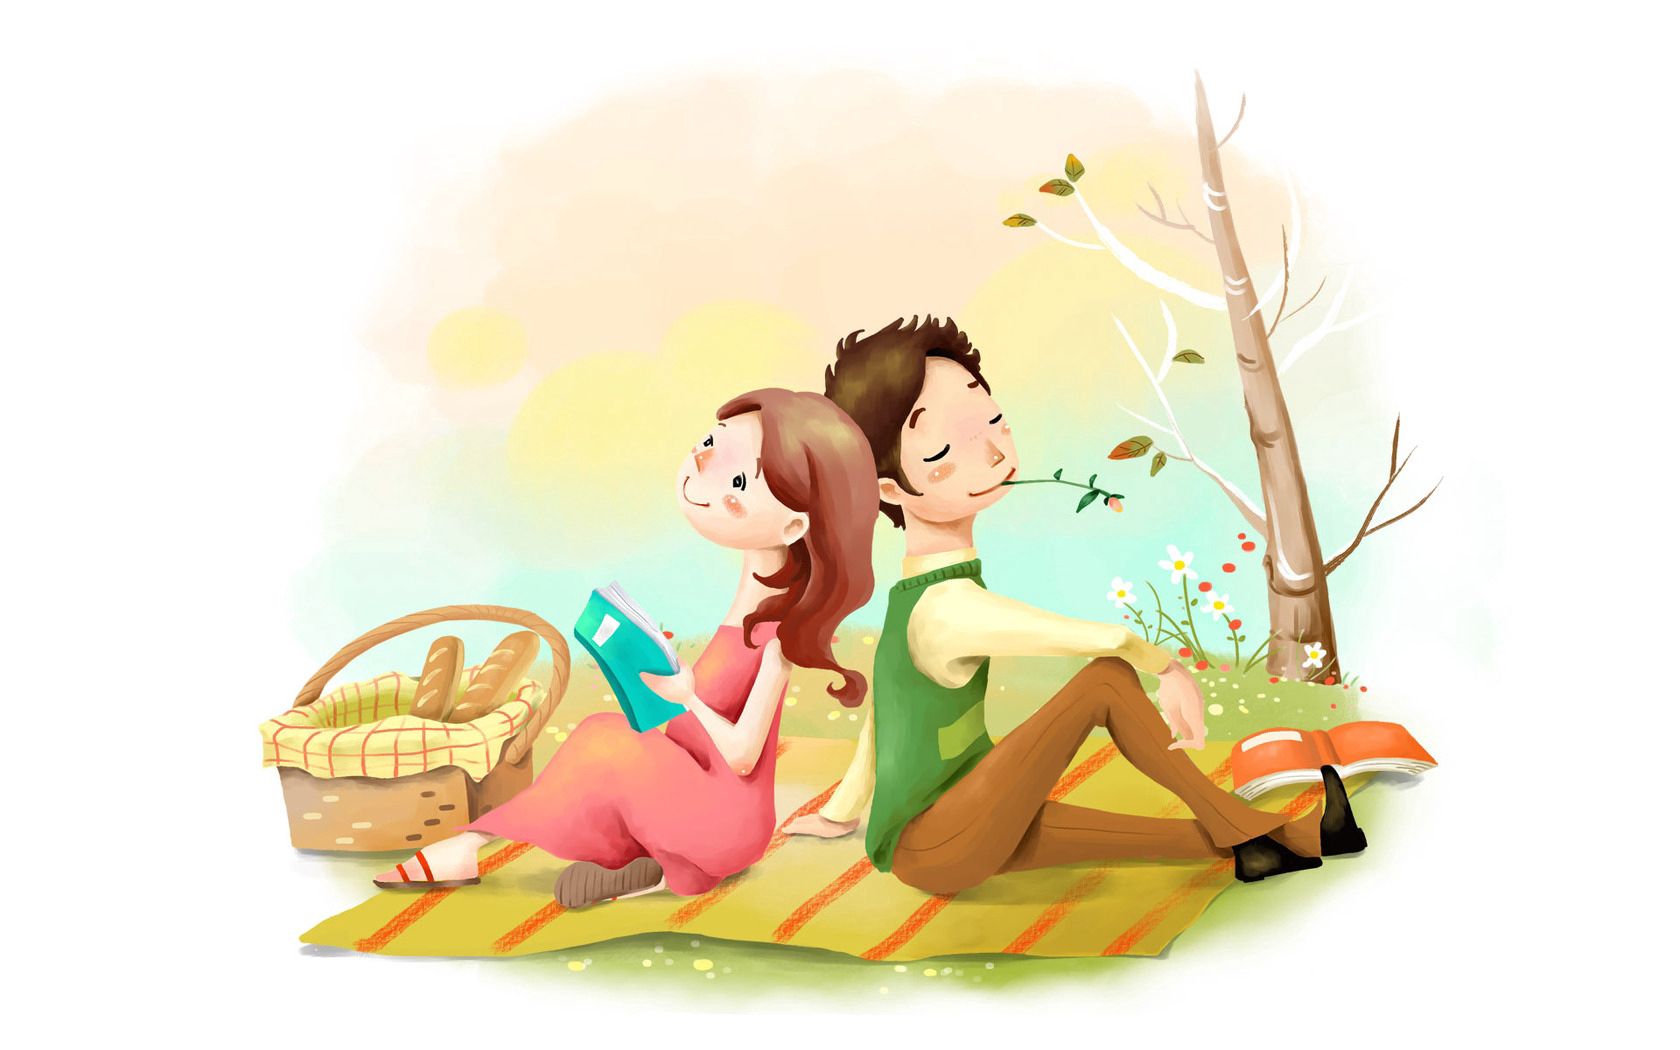 guy, love, drawing, girl, flowers, picture, basket, lawn, positive, bread, picnic, reverie, dreaminess download HD wallpaper